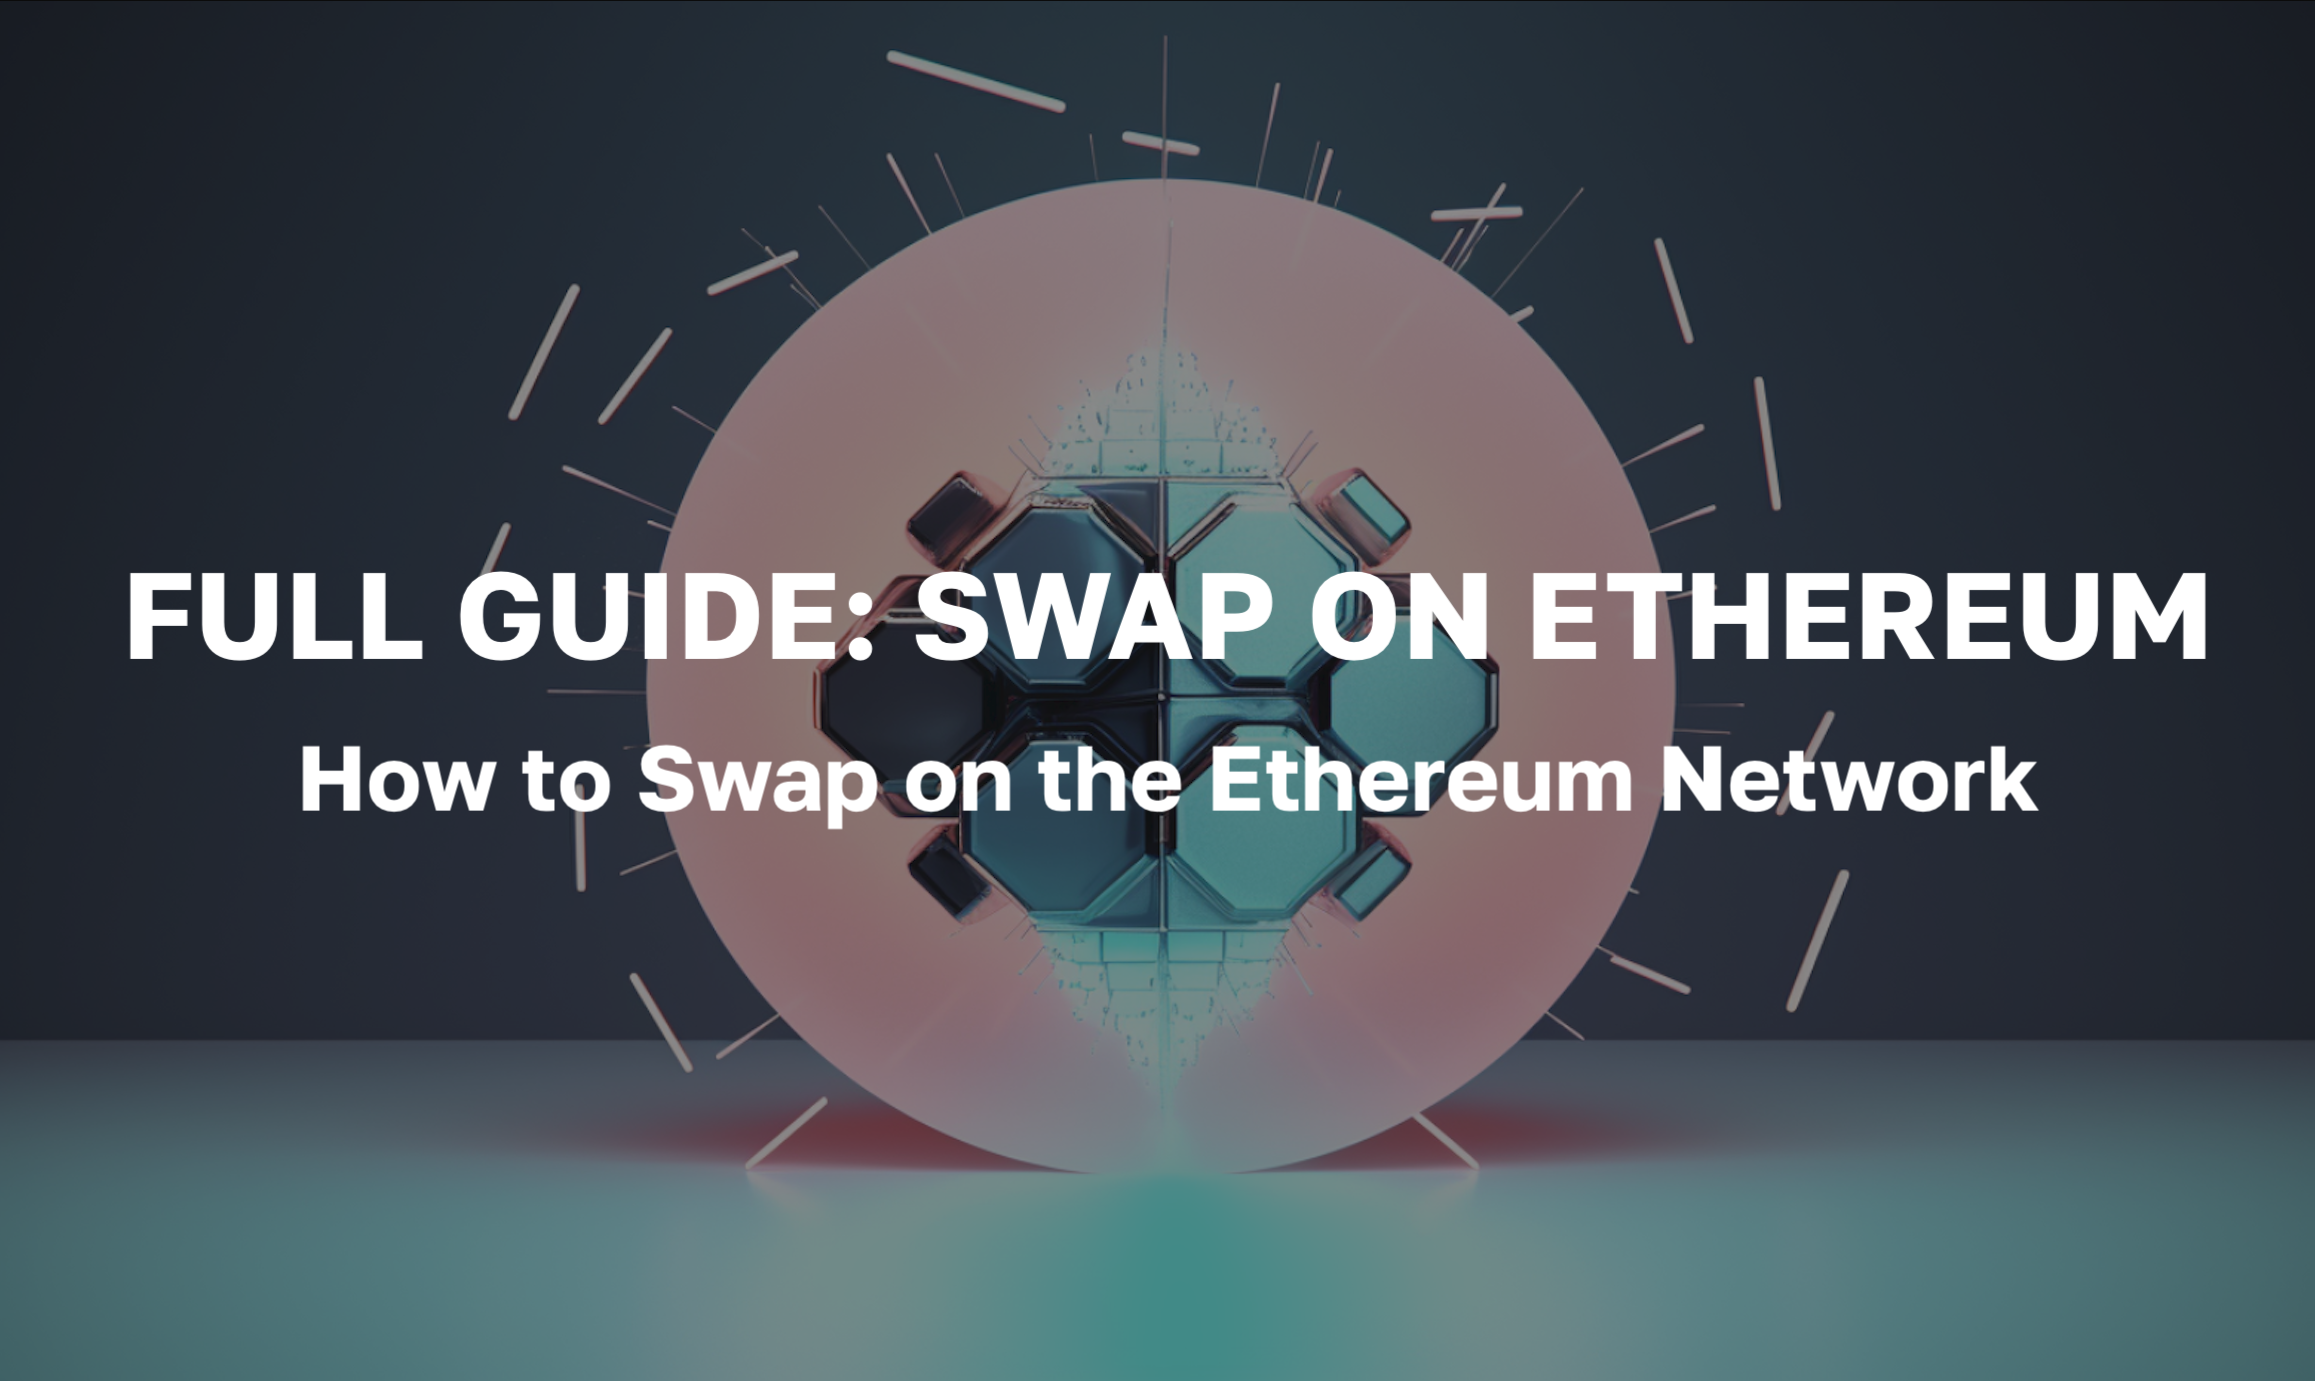 Full Guide/ How to Swap on the Ethereum Network